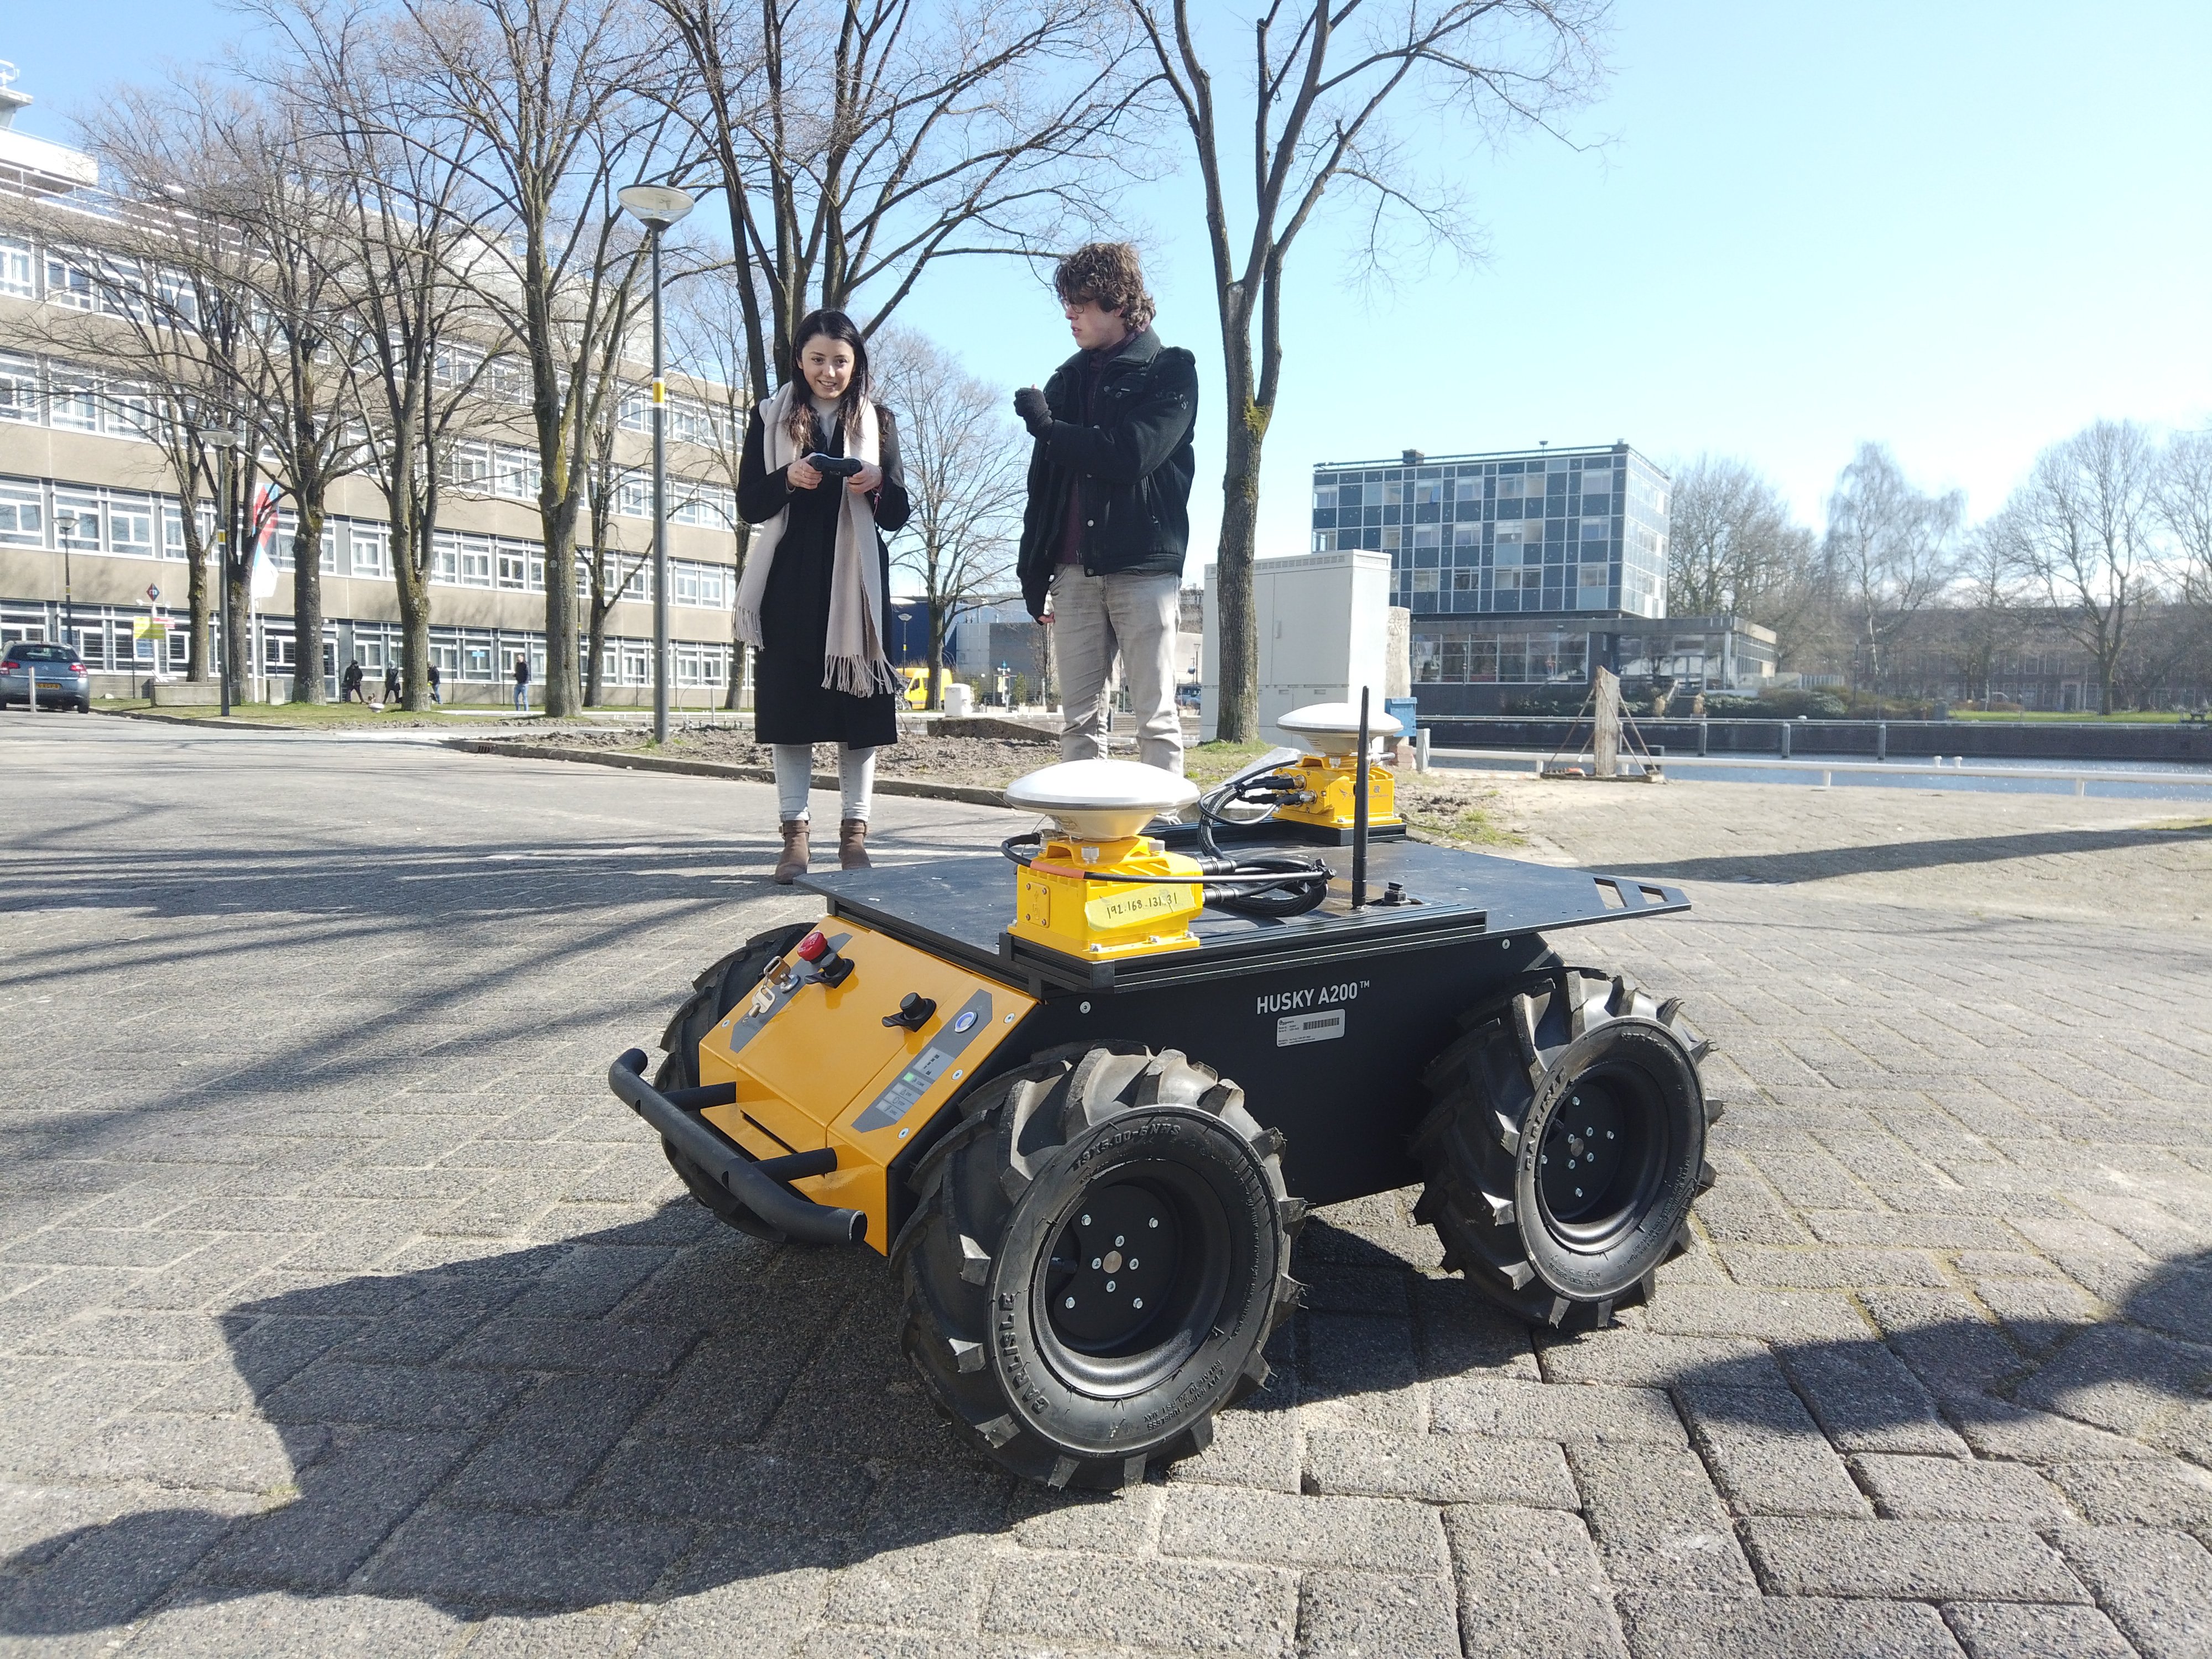 AMS Institute on Twitter: "Meet 'Husky'. Can you imagine getting your groceries delivered by a like this one? @Marineterrein_A we test how to #design such #robots and their behaviors to make